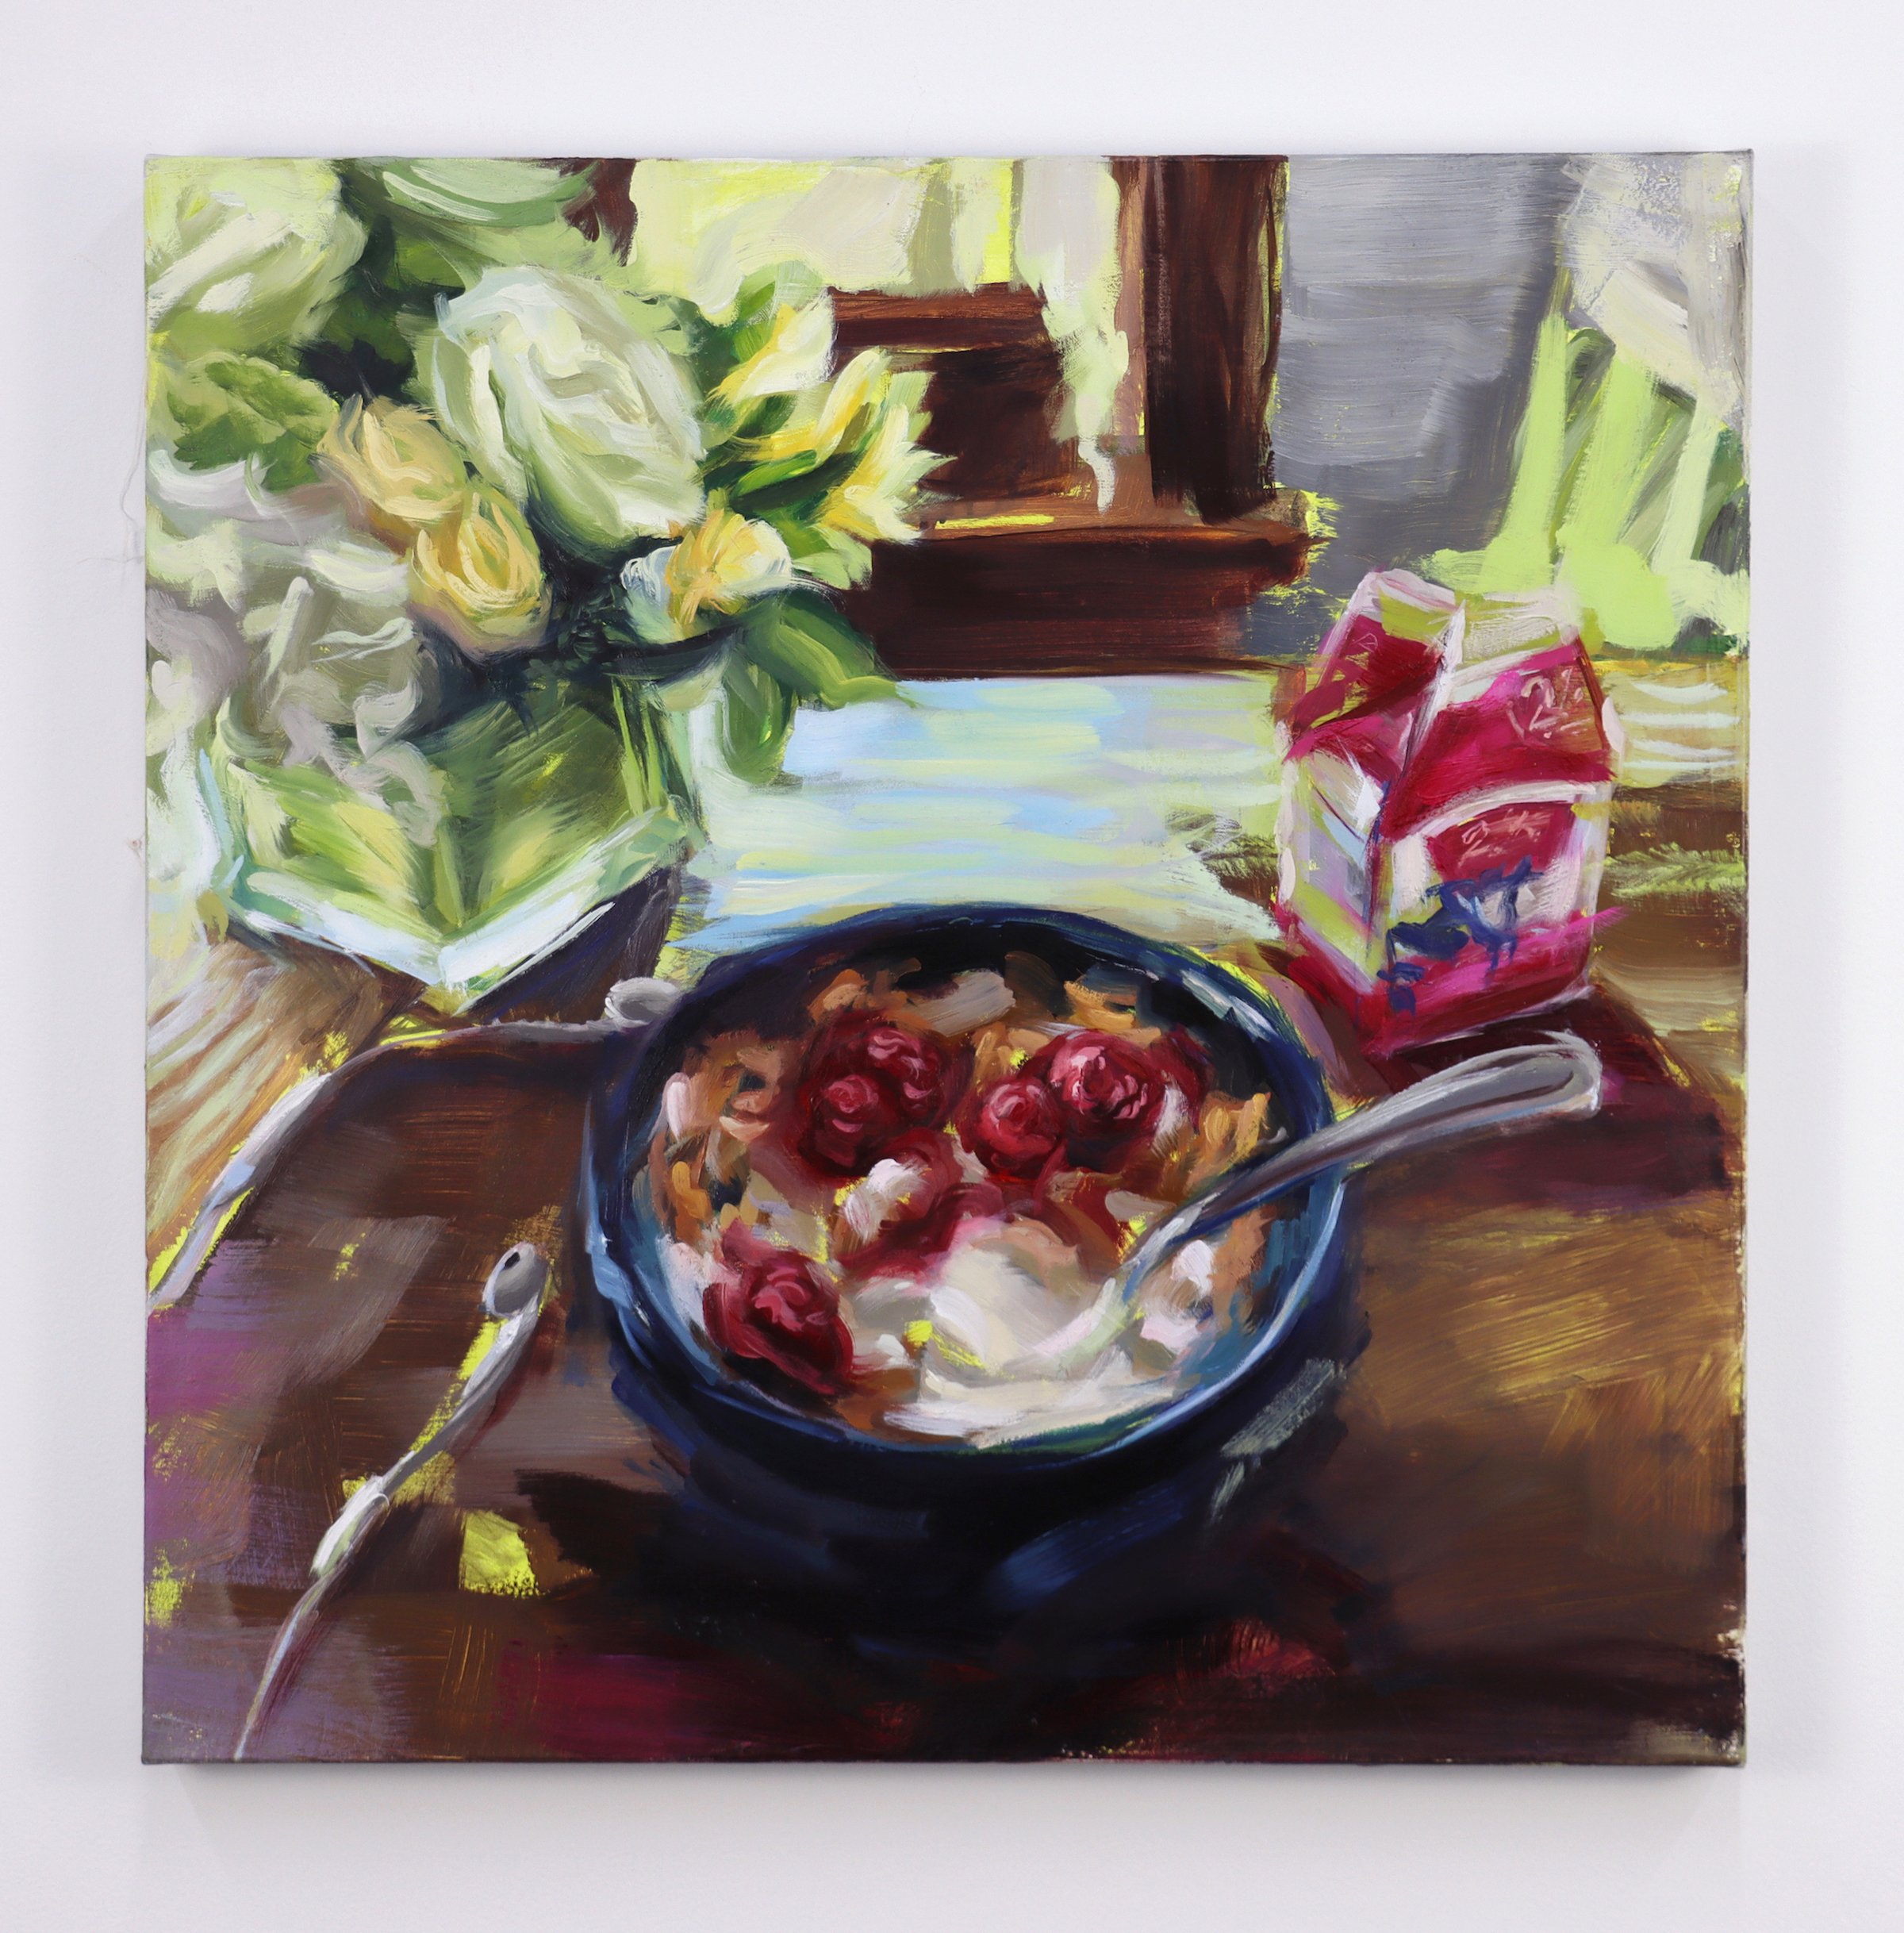  Grief Blossoms and Granola  2021  24 x 24 in.  Oil on canvas 